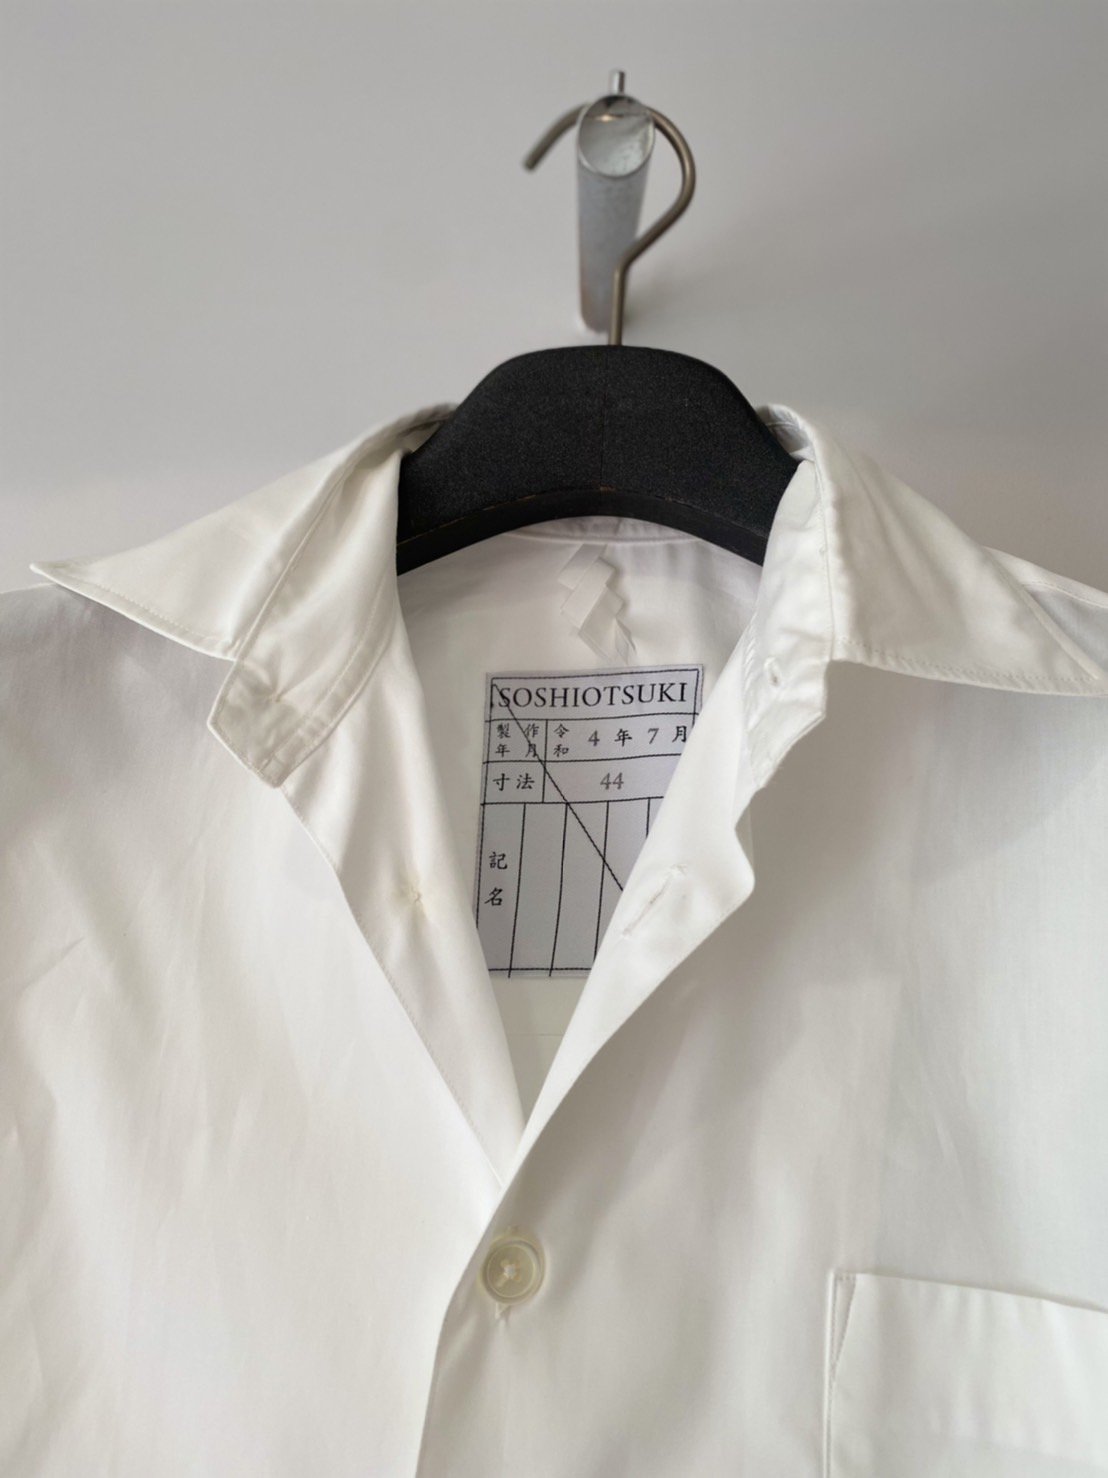 SOSHIOTSUKI<br />THE KINOMO BREASTED SHIRT (WIDE FIT ) / WHITE<img class='new_mark_img2' src='https://img.shop-pro.jp/img/new/icons14.gif' style='border:none;display:inline;margin:0px;padding:0px;width:auto;' />